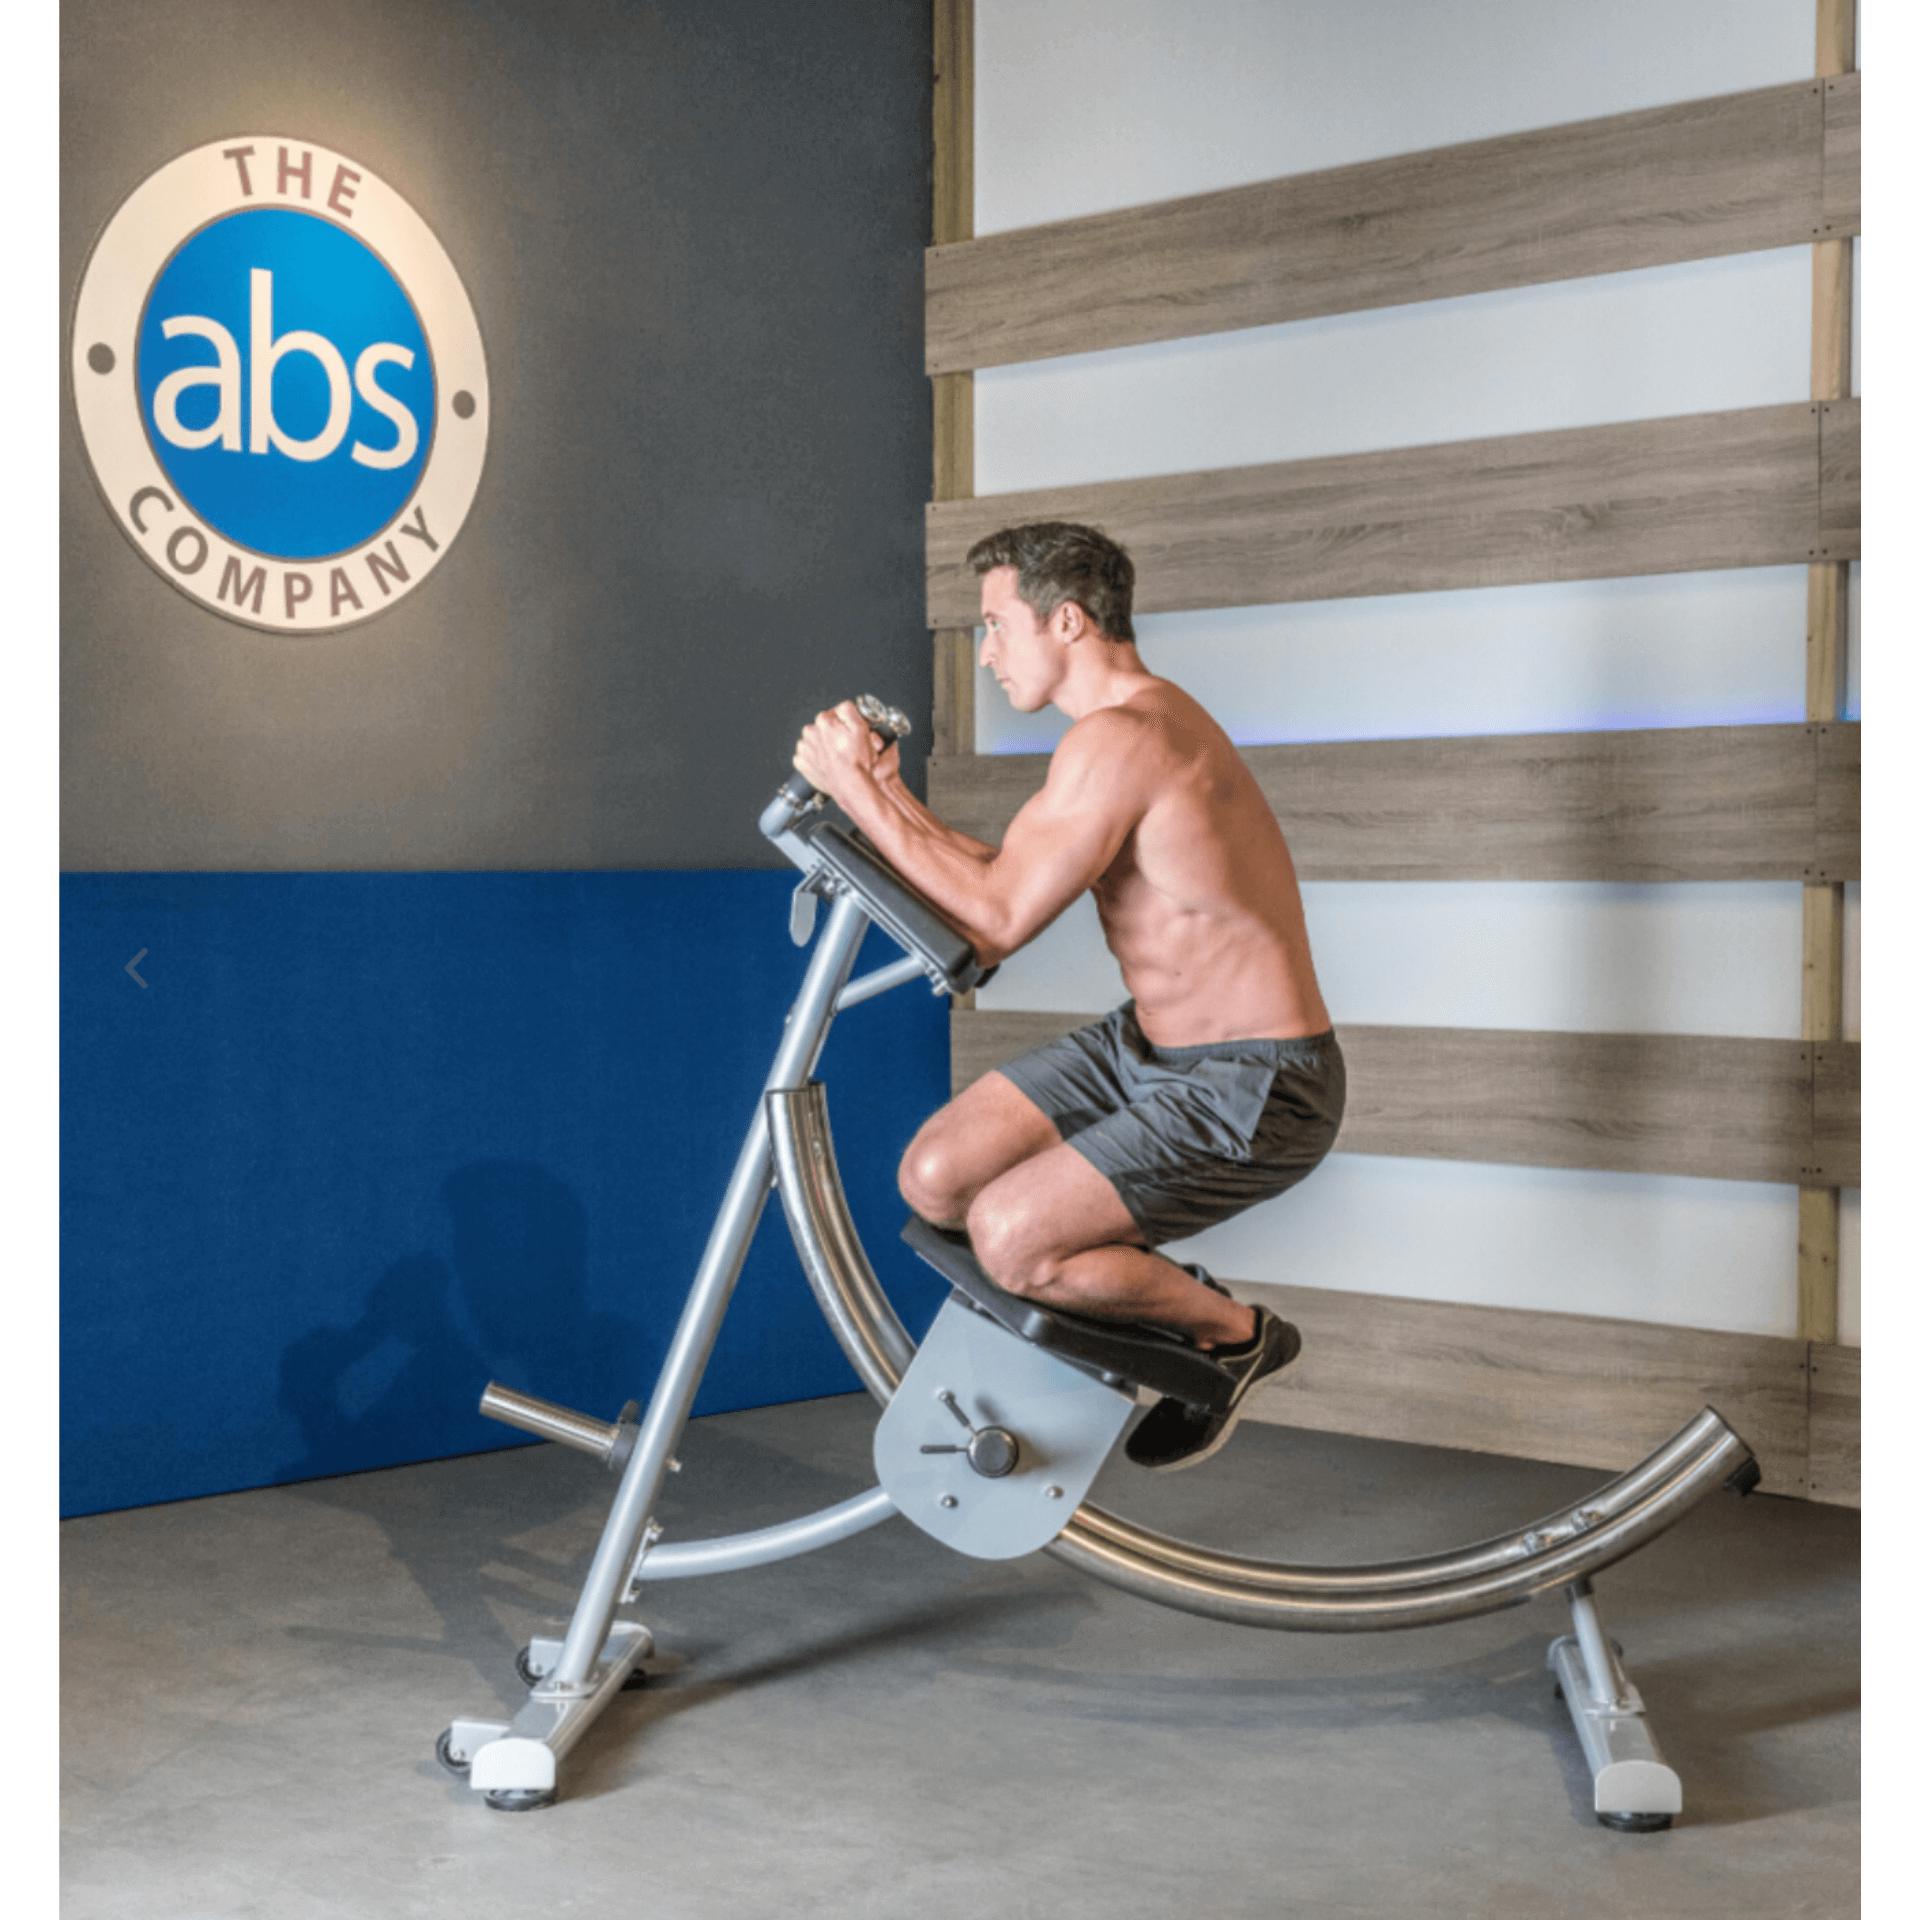 The Abs Company AB Coastal CS3000 with male model exercising 